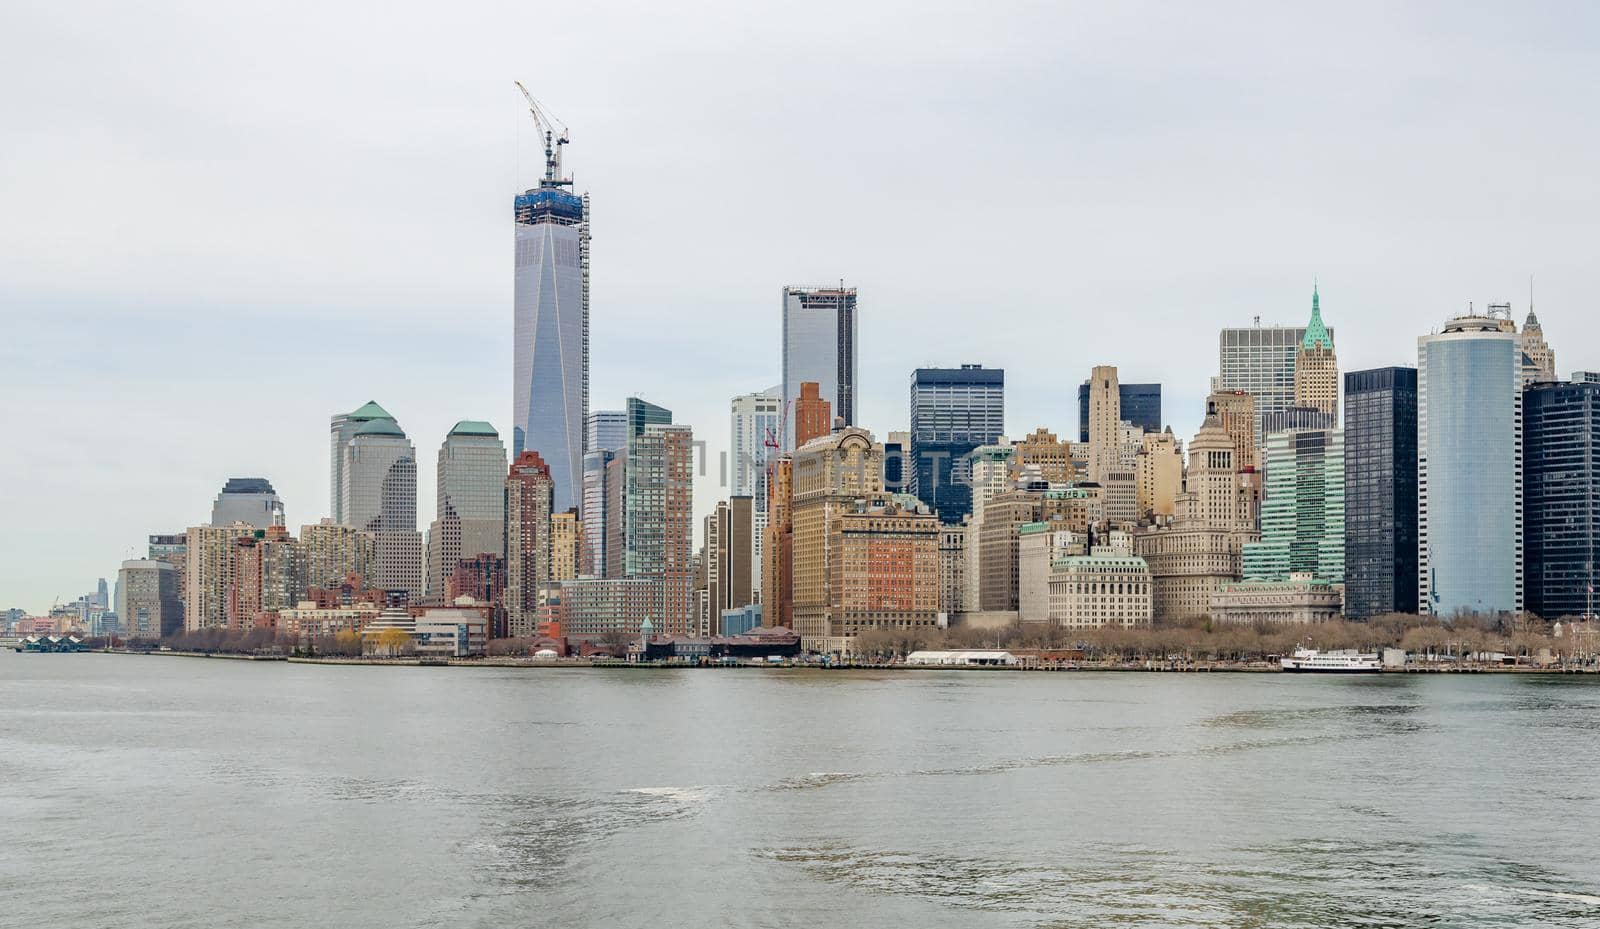 Manhattan Skyline with One World Trade Center with construction area, Crane on top of it and Hudson river in forefront, during winter day with overcast, horizontal